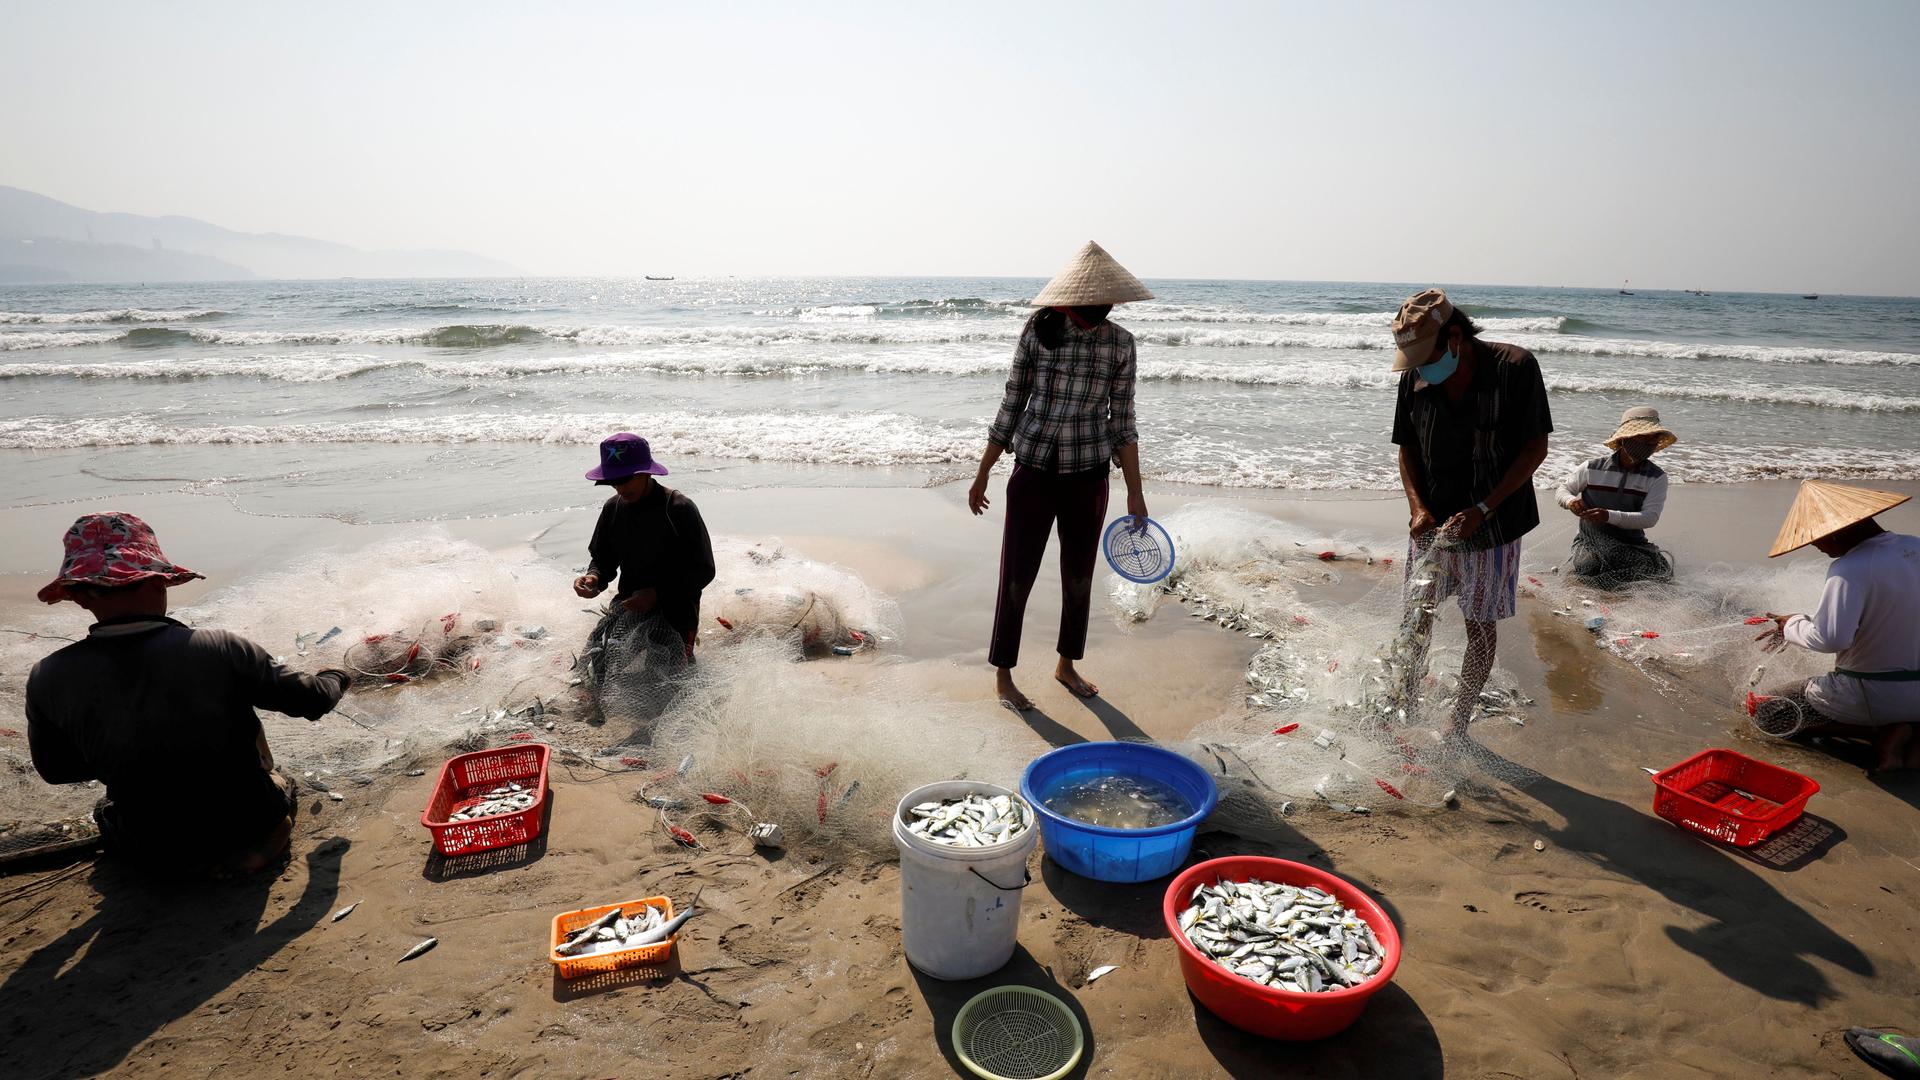 People wearing protective masks collect fishes on a beach during the coronavirus disease (COVID-19) outbreak in Da Nang city, Vietnam, May 6, 2020. 